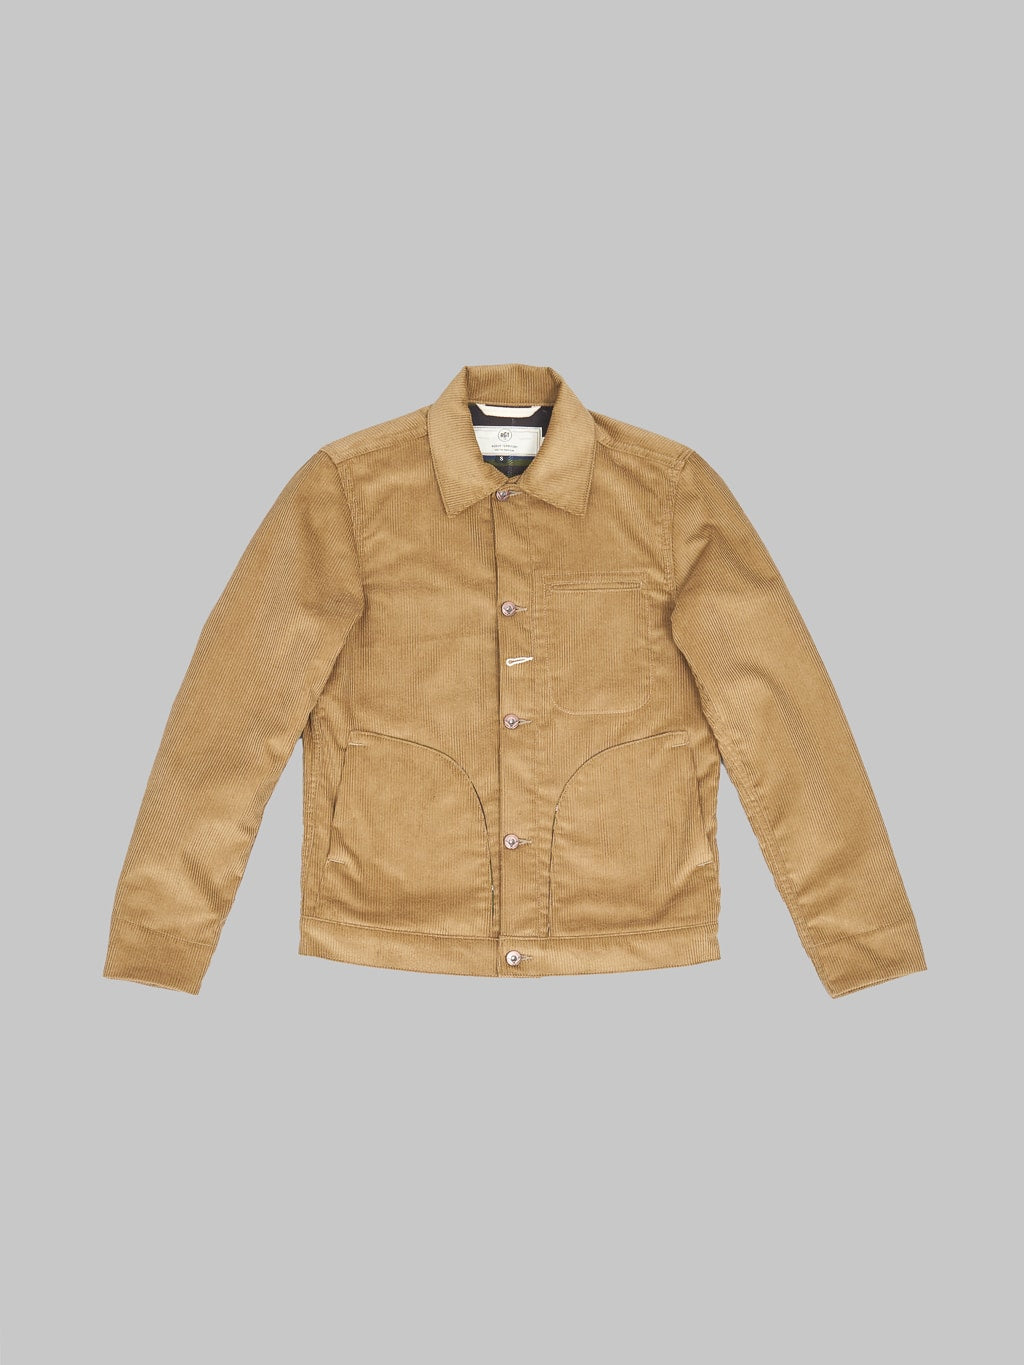 Rogue Territory Supply Jacket Lined Tan Corduroy front